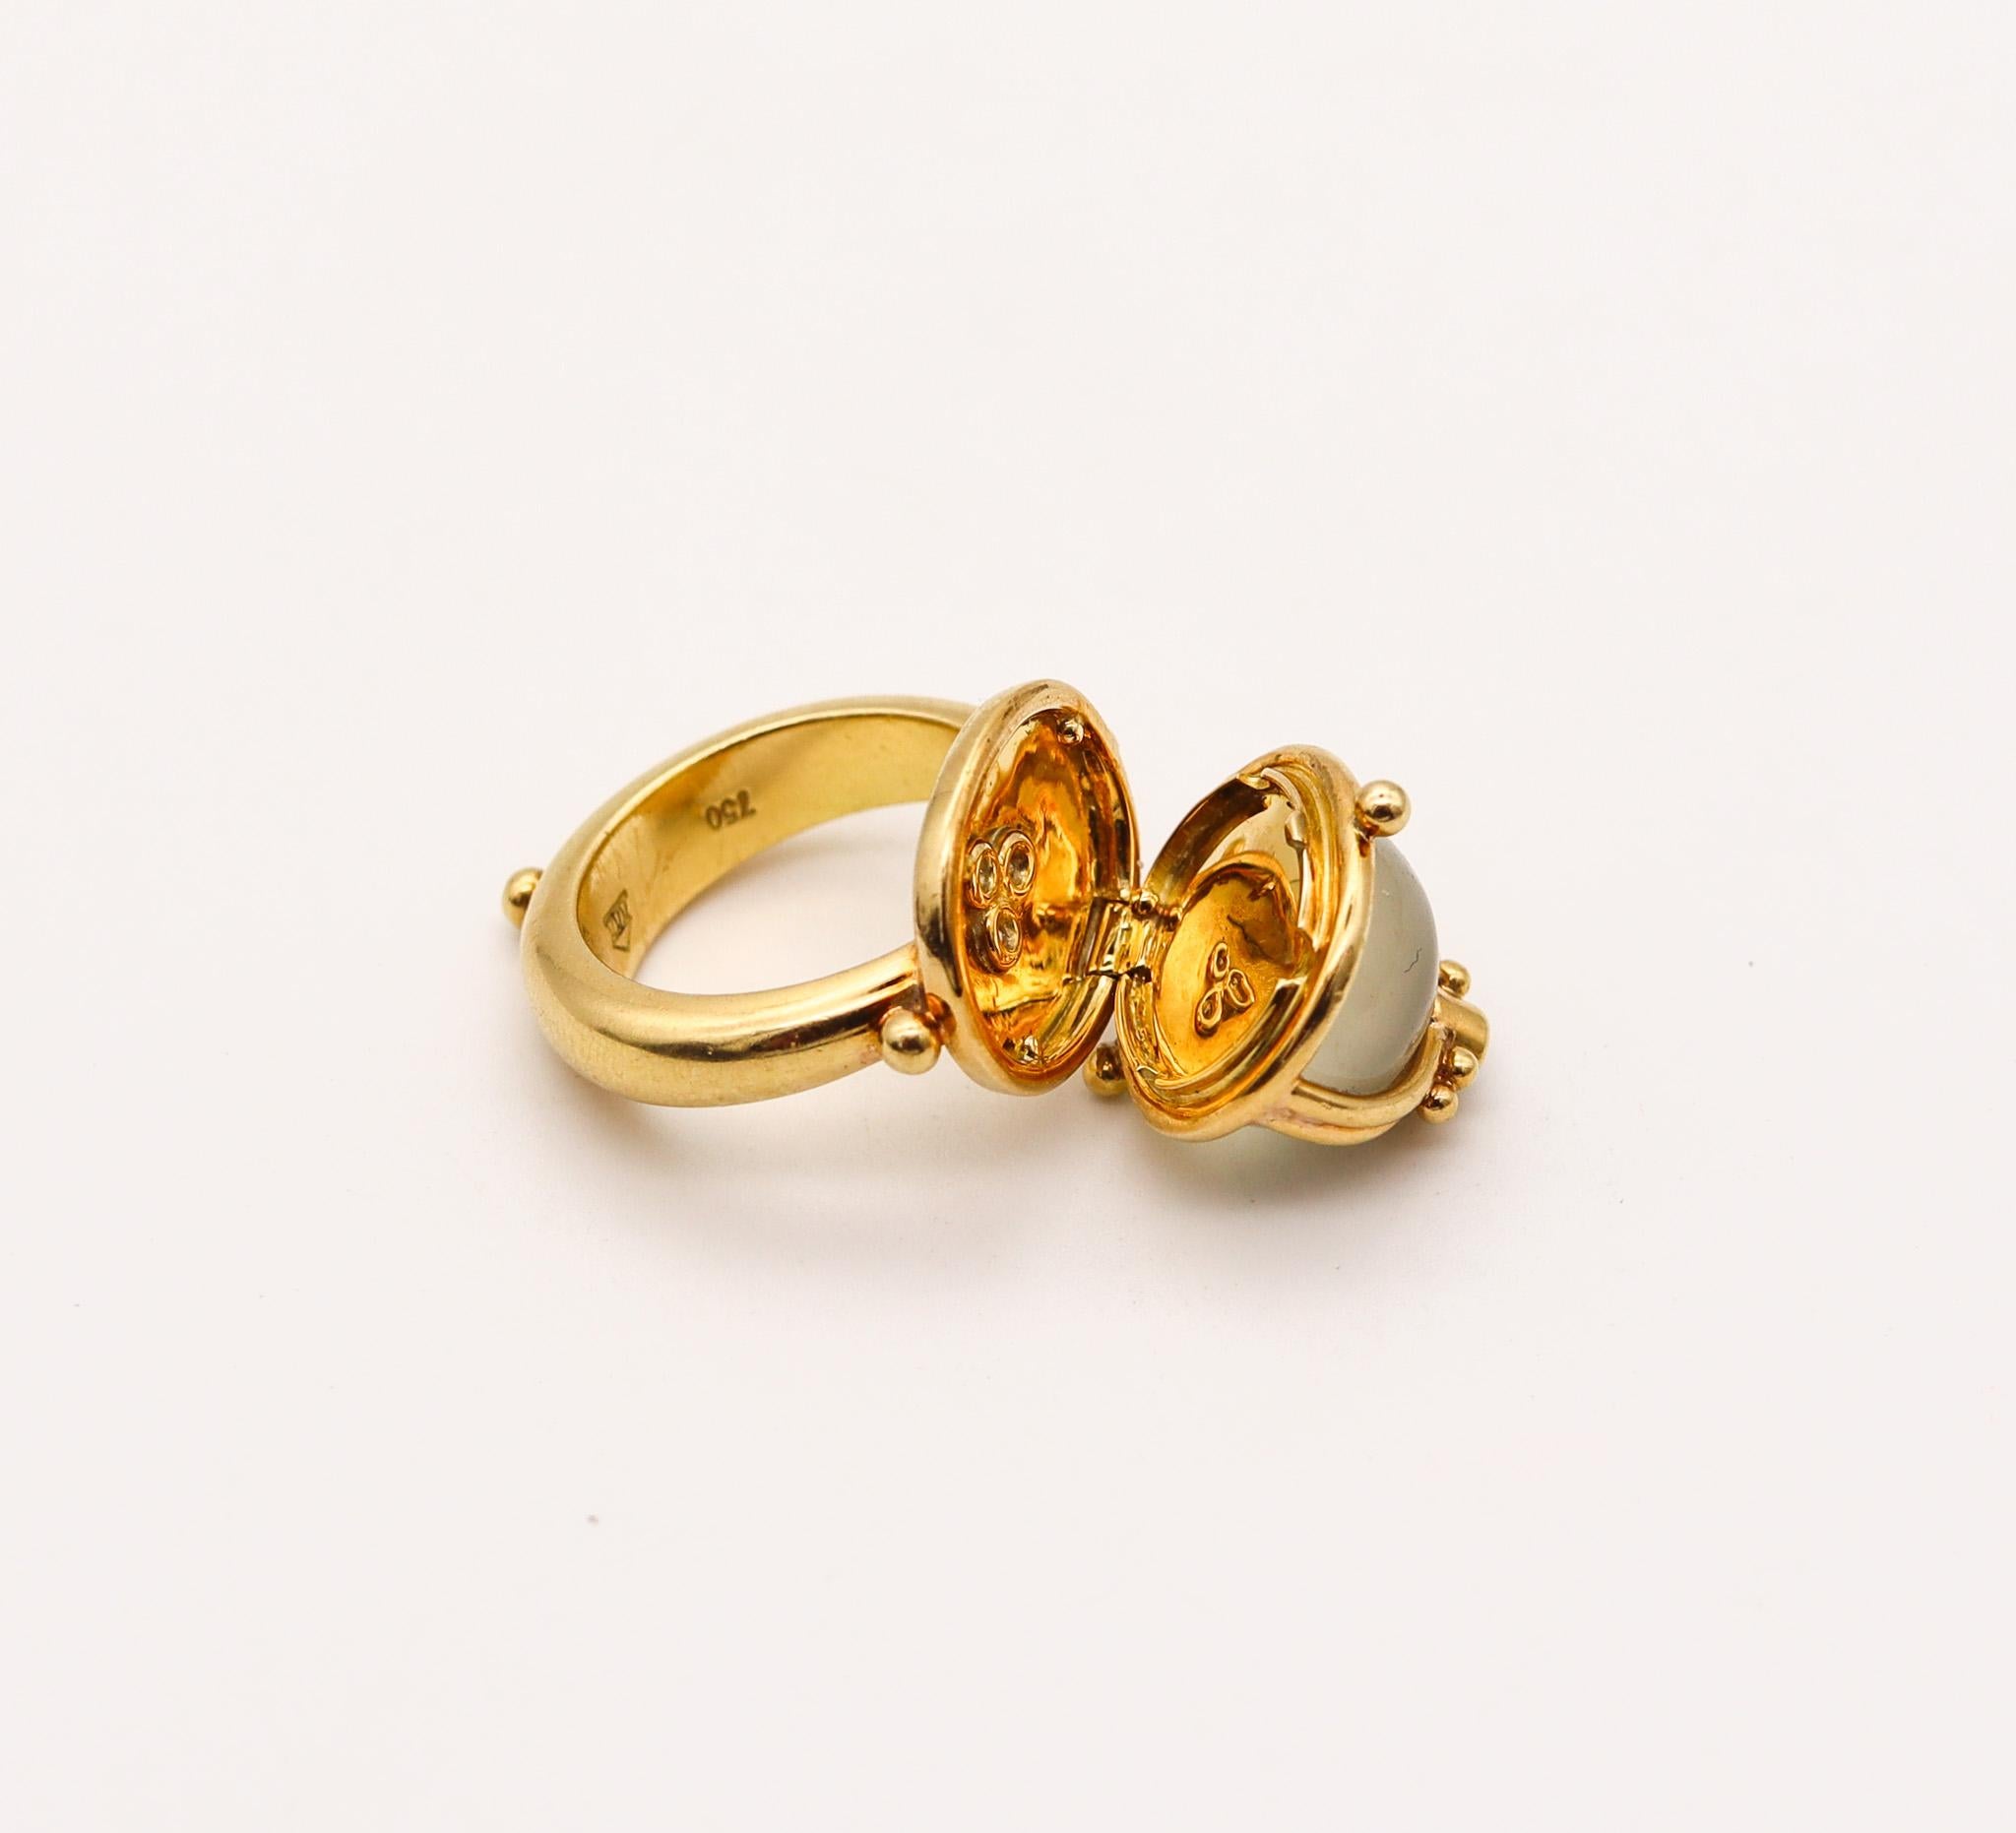 Cocktail poison ring designed by Temple St. Claire.

Gorgeous and rare ring created by the jewelry designer Temple St. Clair. This poison cocktail ring was made at her workshop studio in Italy and crafted in solid yellow gold of 18 karats with high